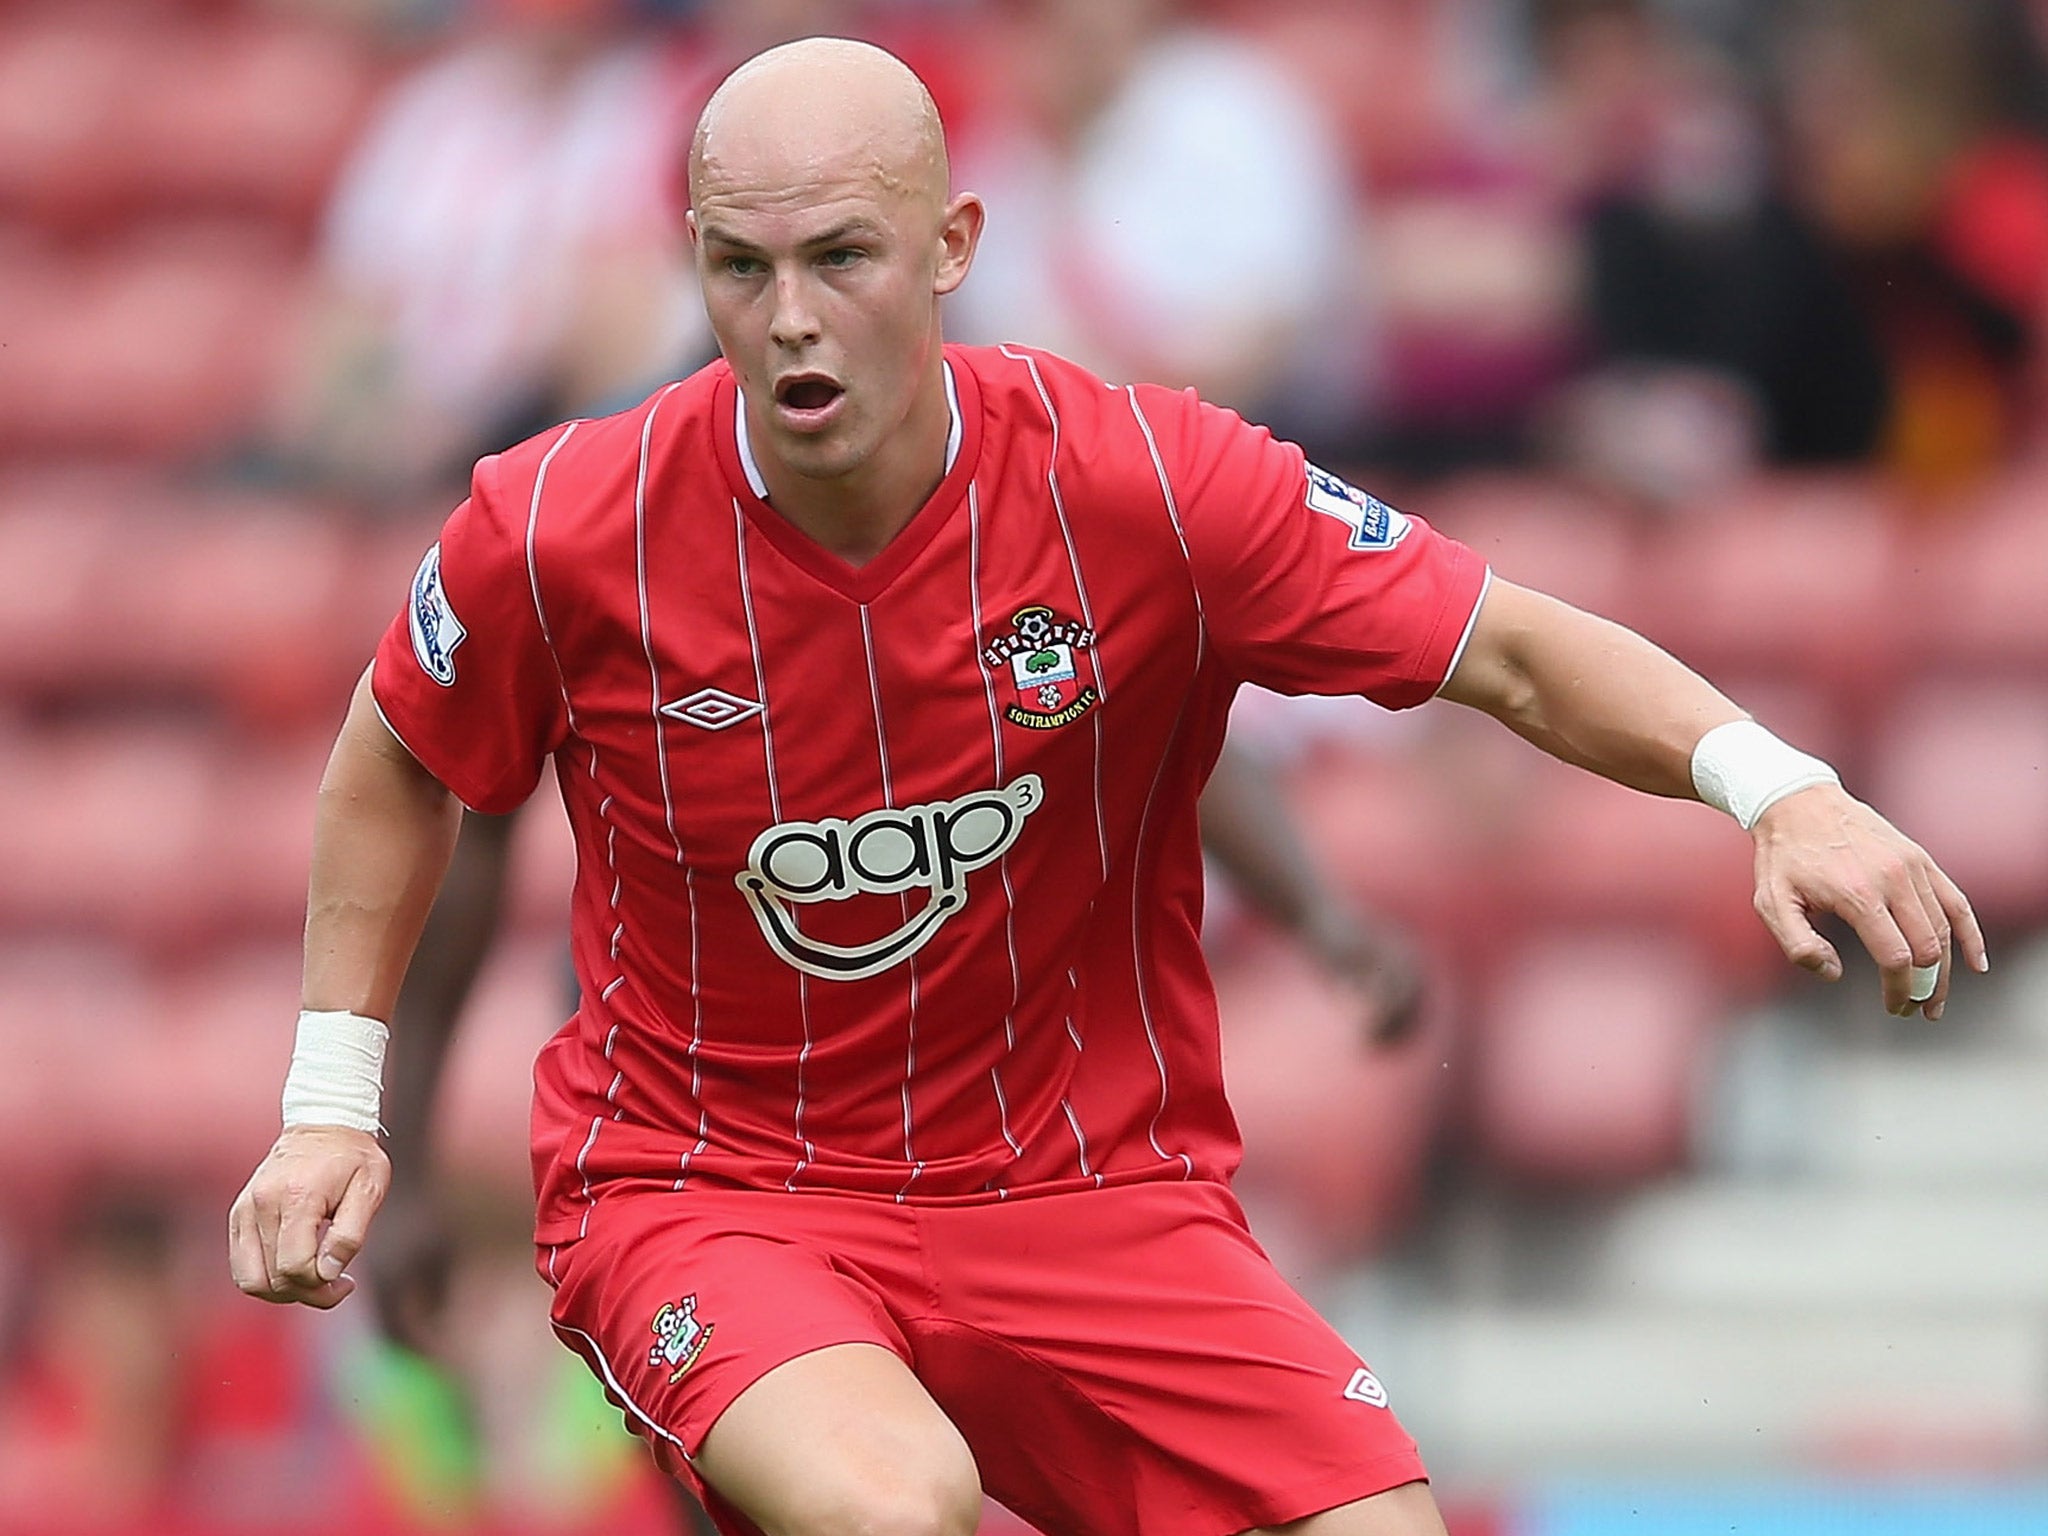 Richard Chaplow has been given a two-match ban for using homophobic language